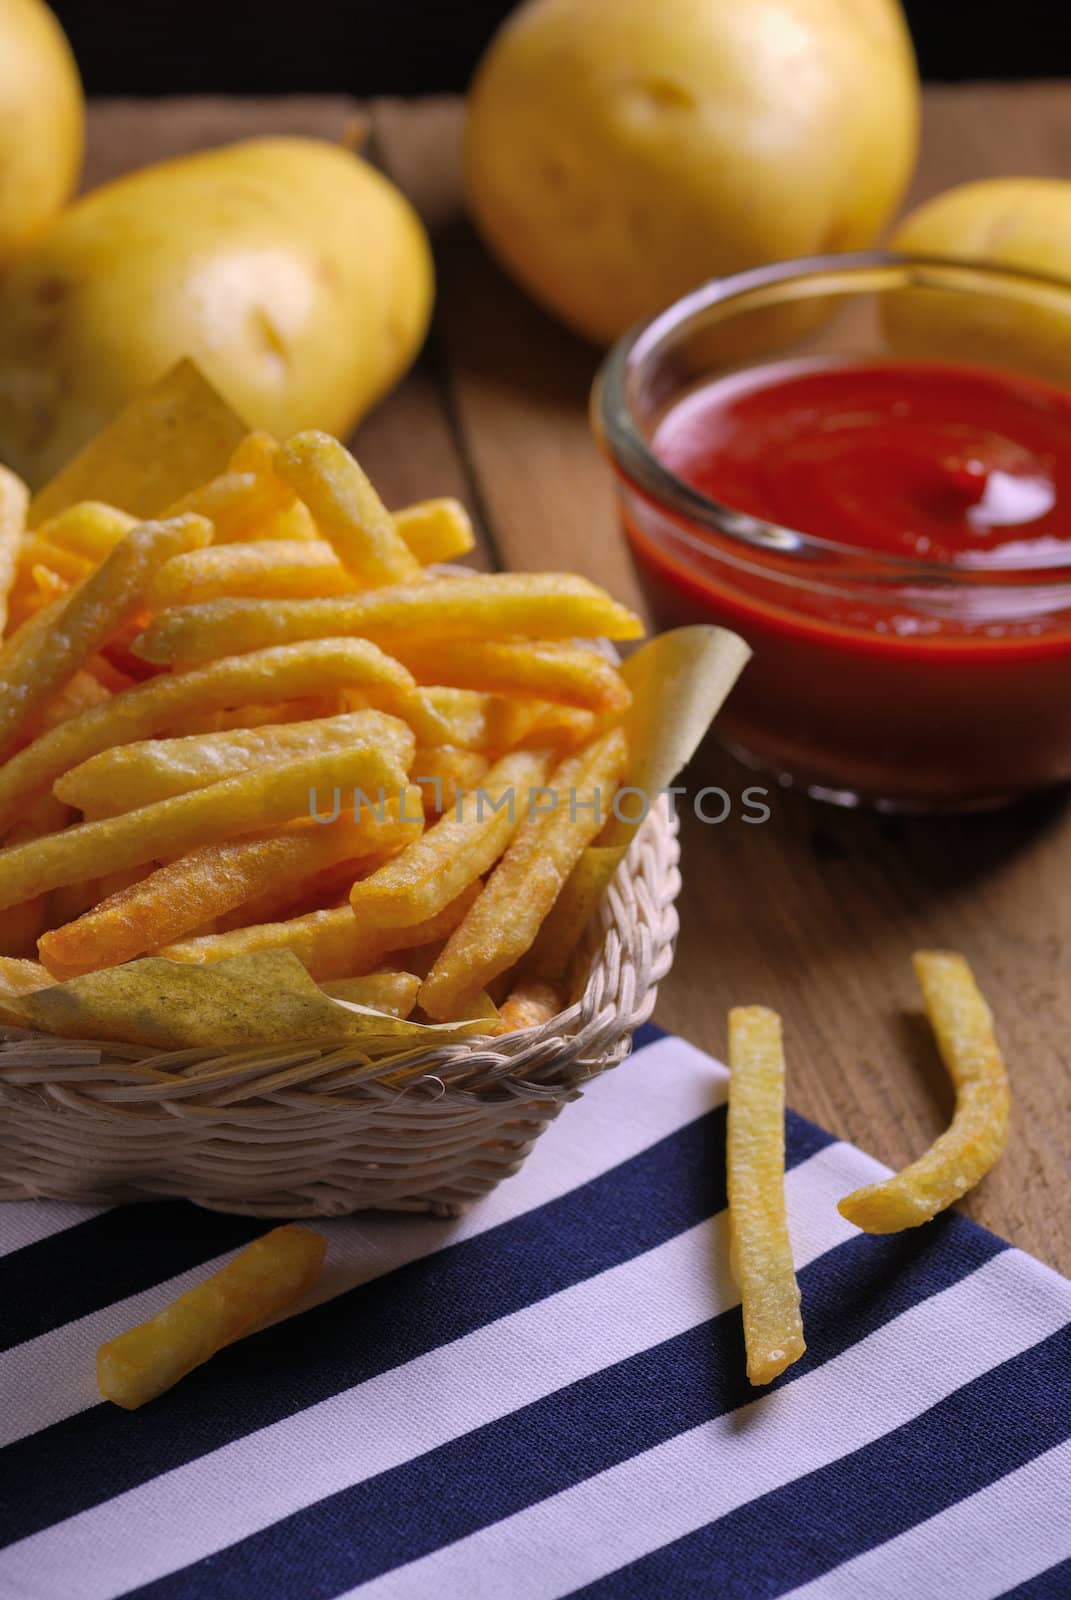 Traditional French fries with ketchup